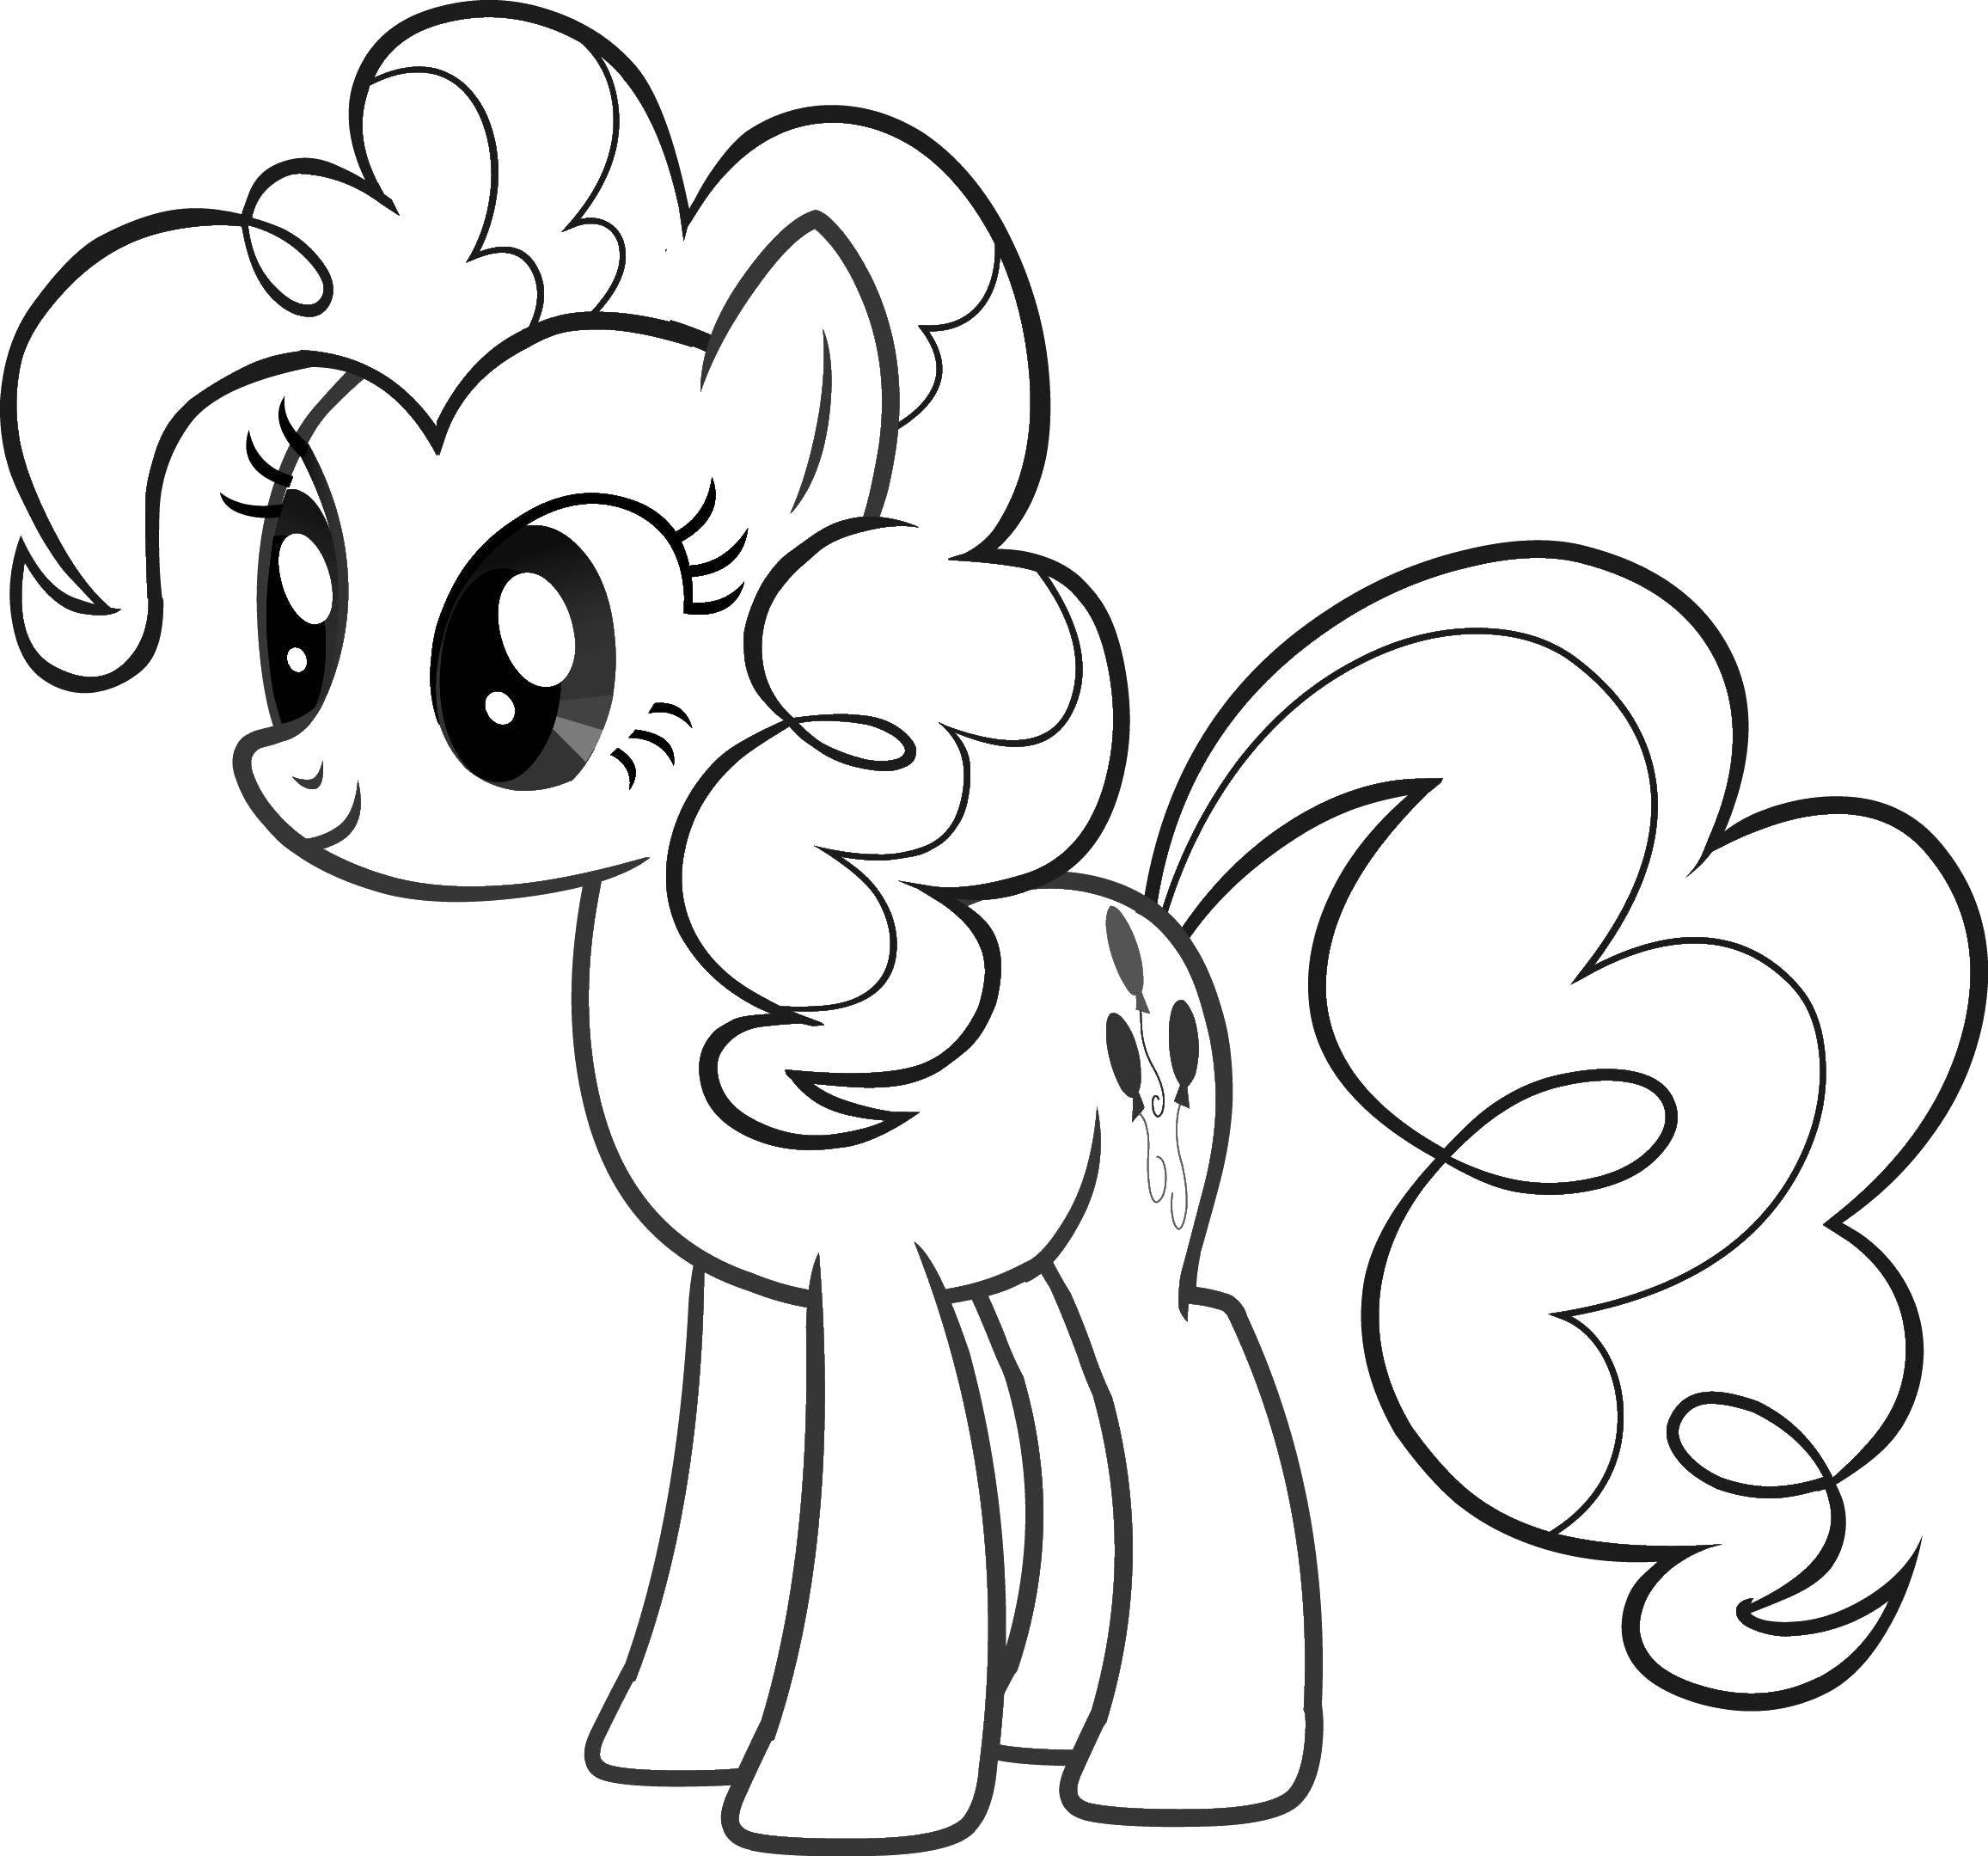 Coloring Beautiful pony. Category my little pony. Tags:  Pony, My little pony .